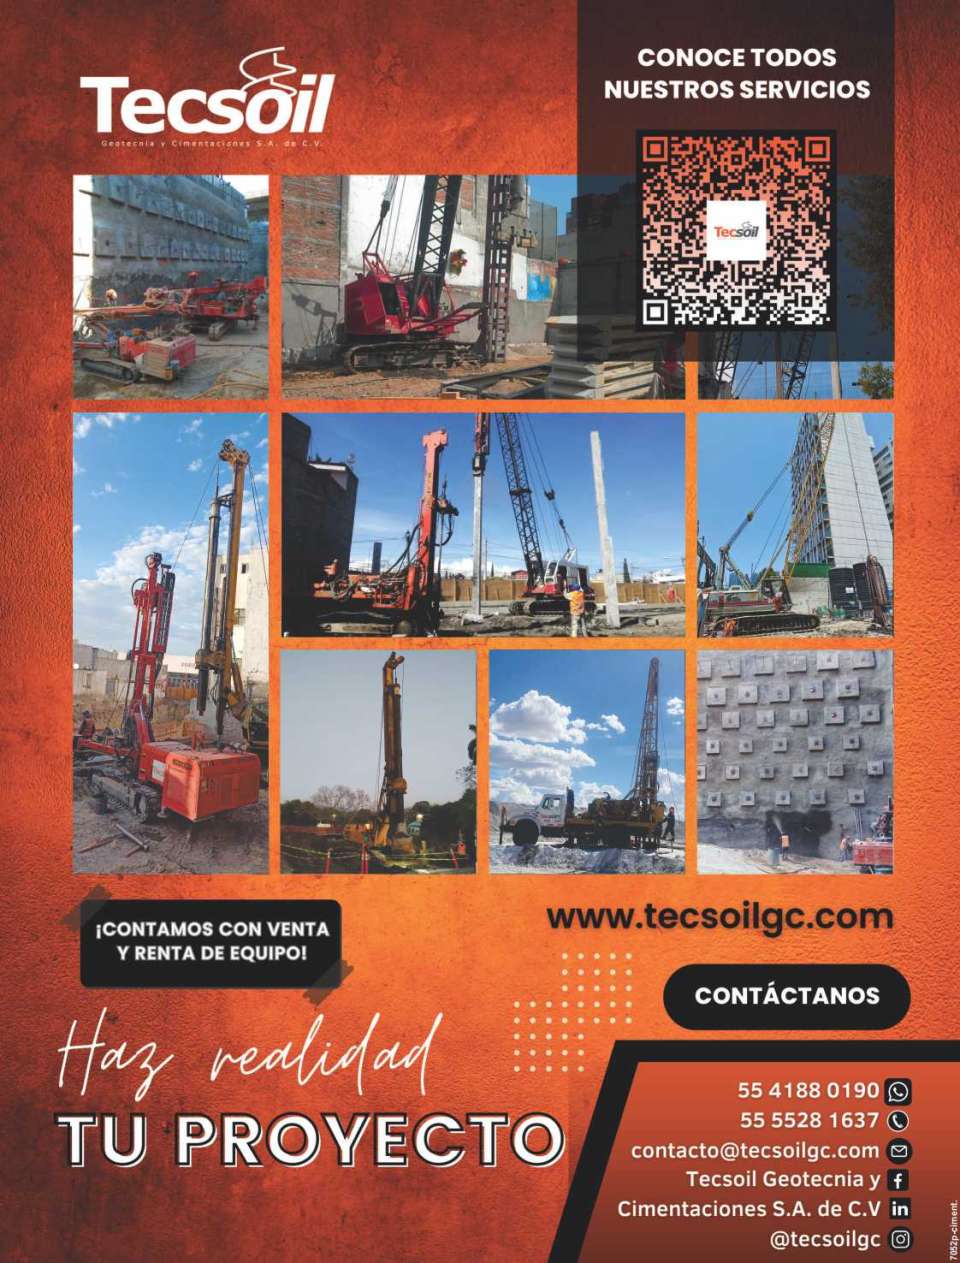 Phreatic Surface Control, Anchoring, Foundations, Concrete Spraying, Pile Foundations, Grouting, Soil Mechanics, Micropiles, Foundations Walls, Retaining Wall, Rental Equipment.